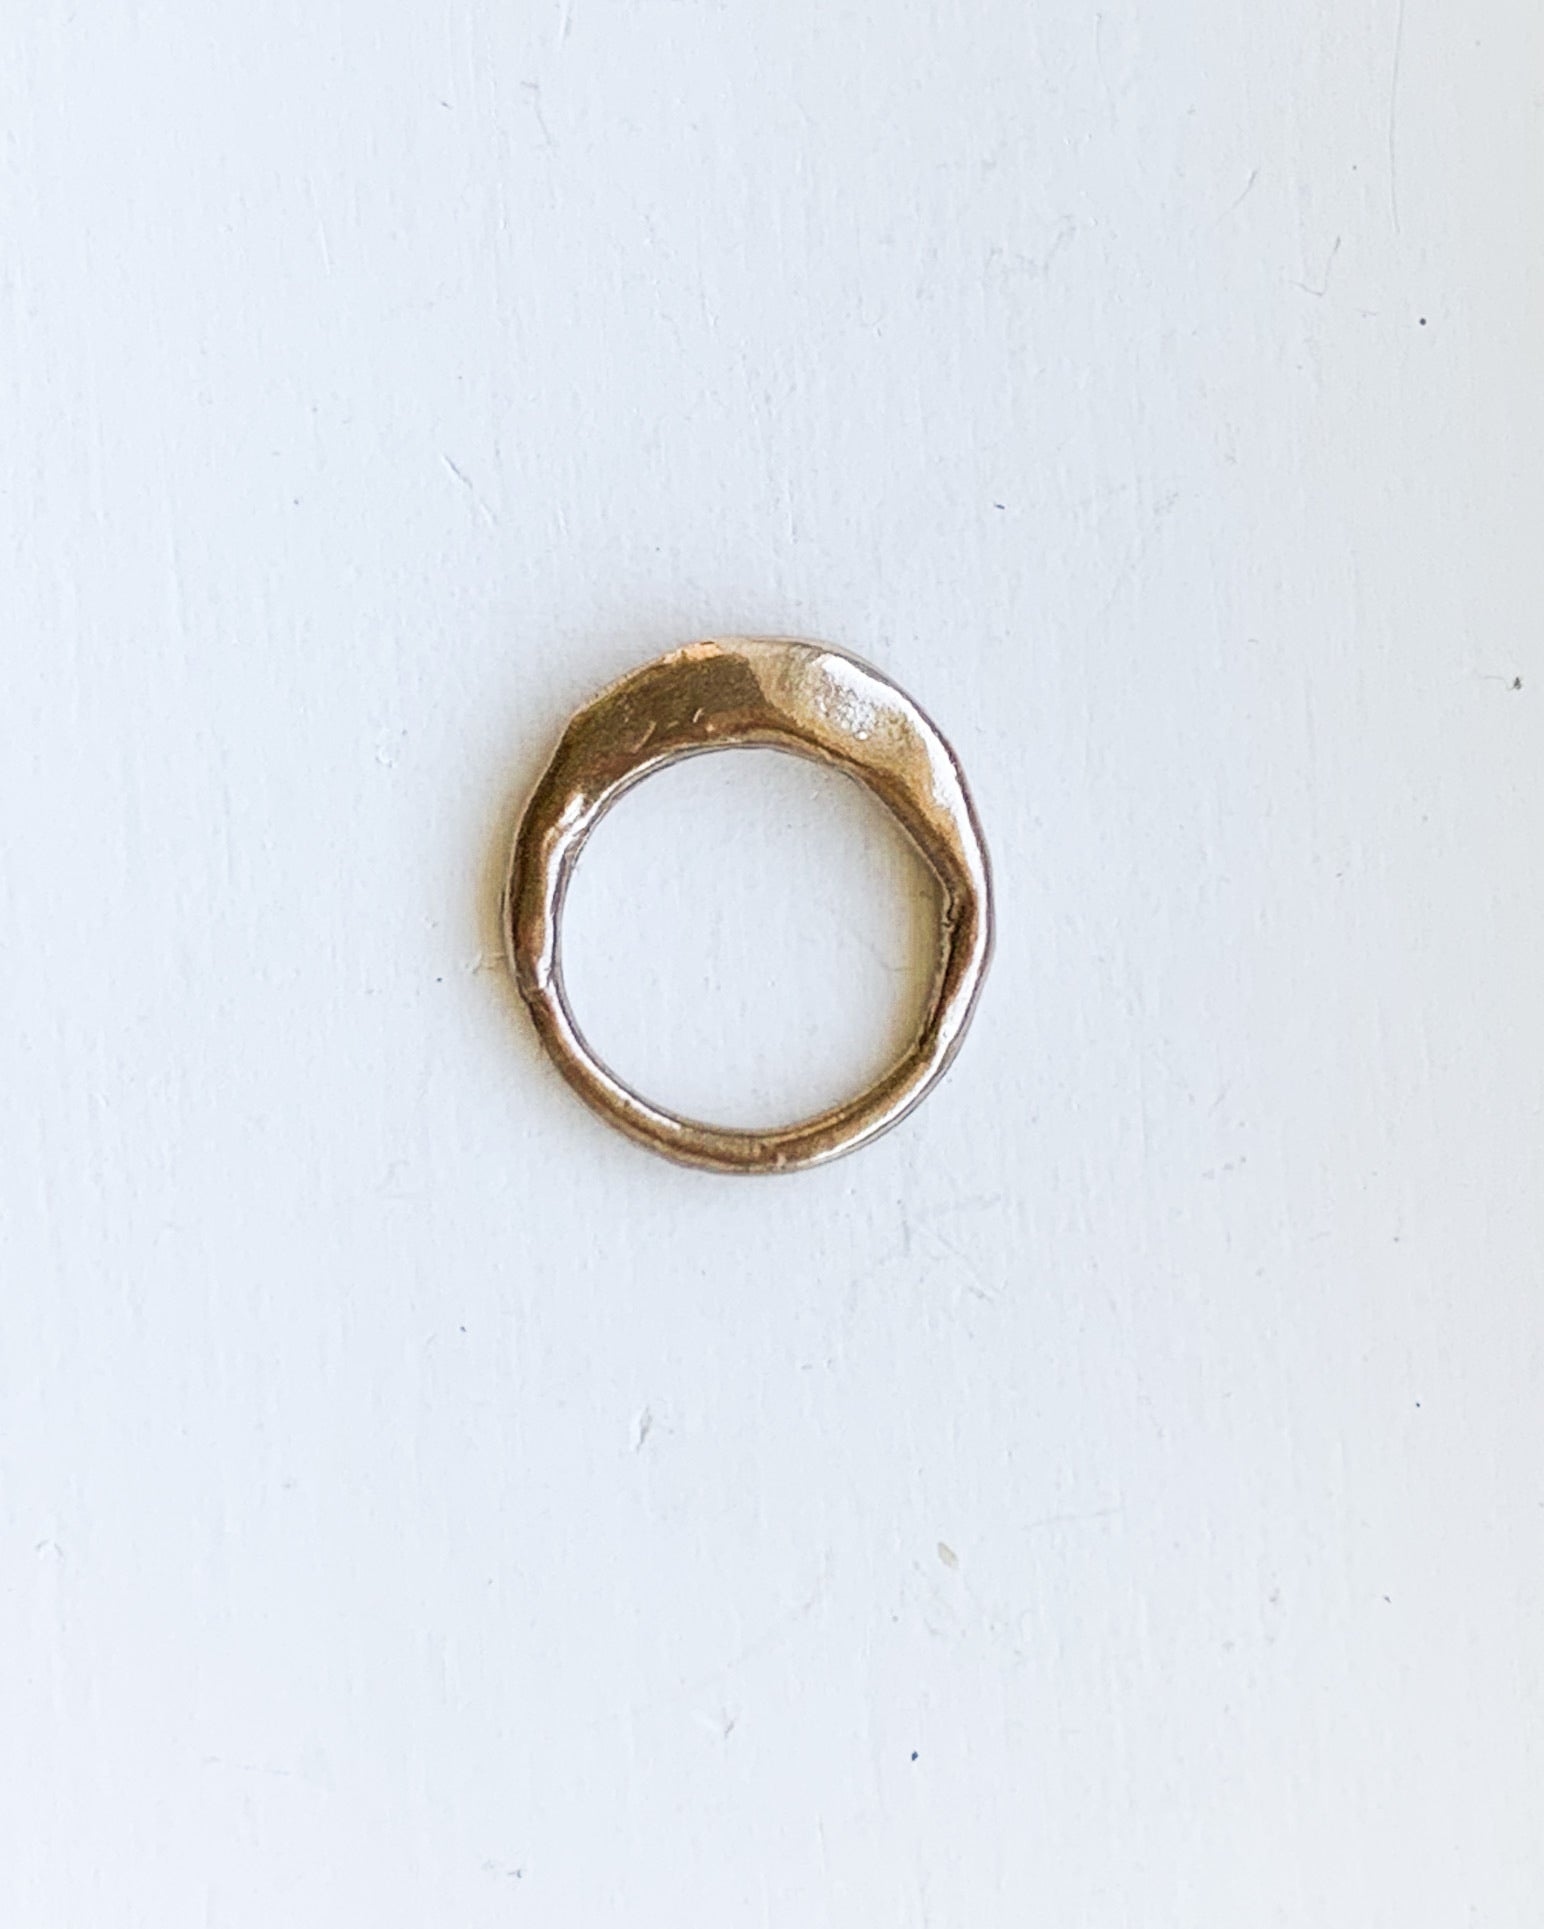 a hand formed bronze ring made from wax cast in metal on a white background